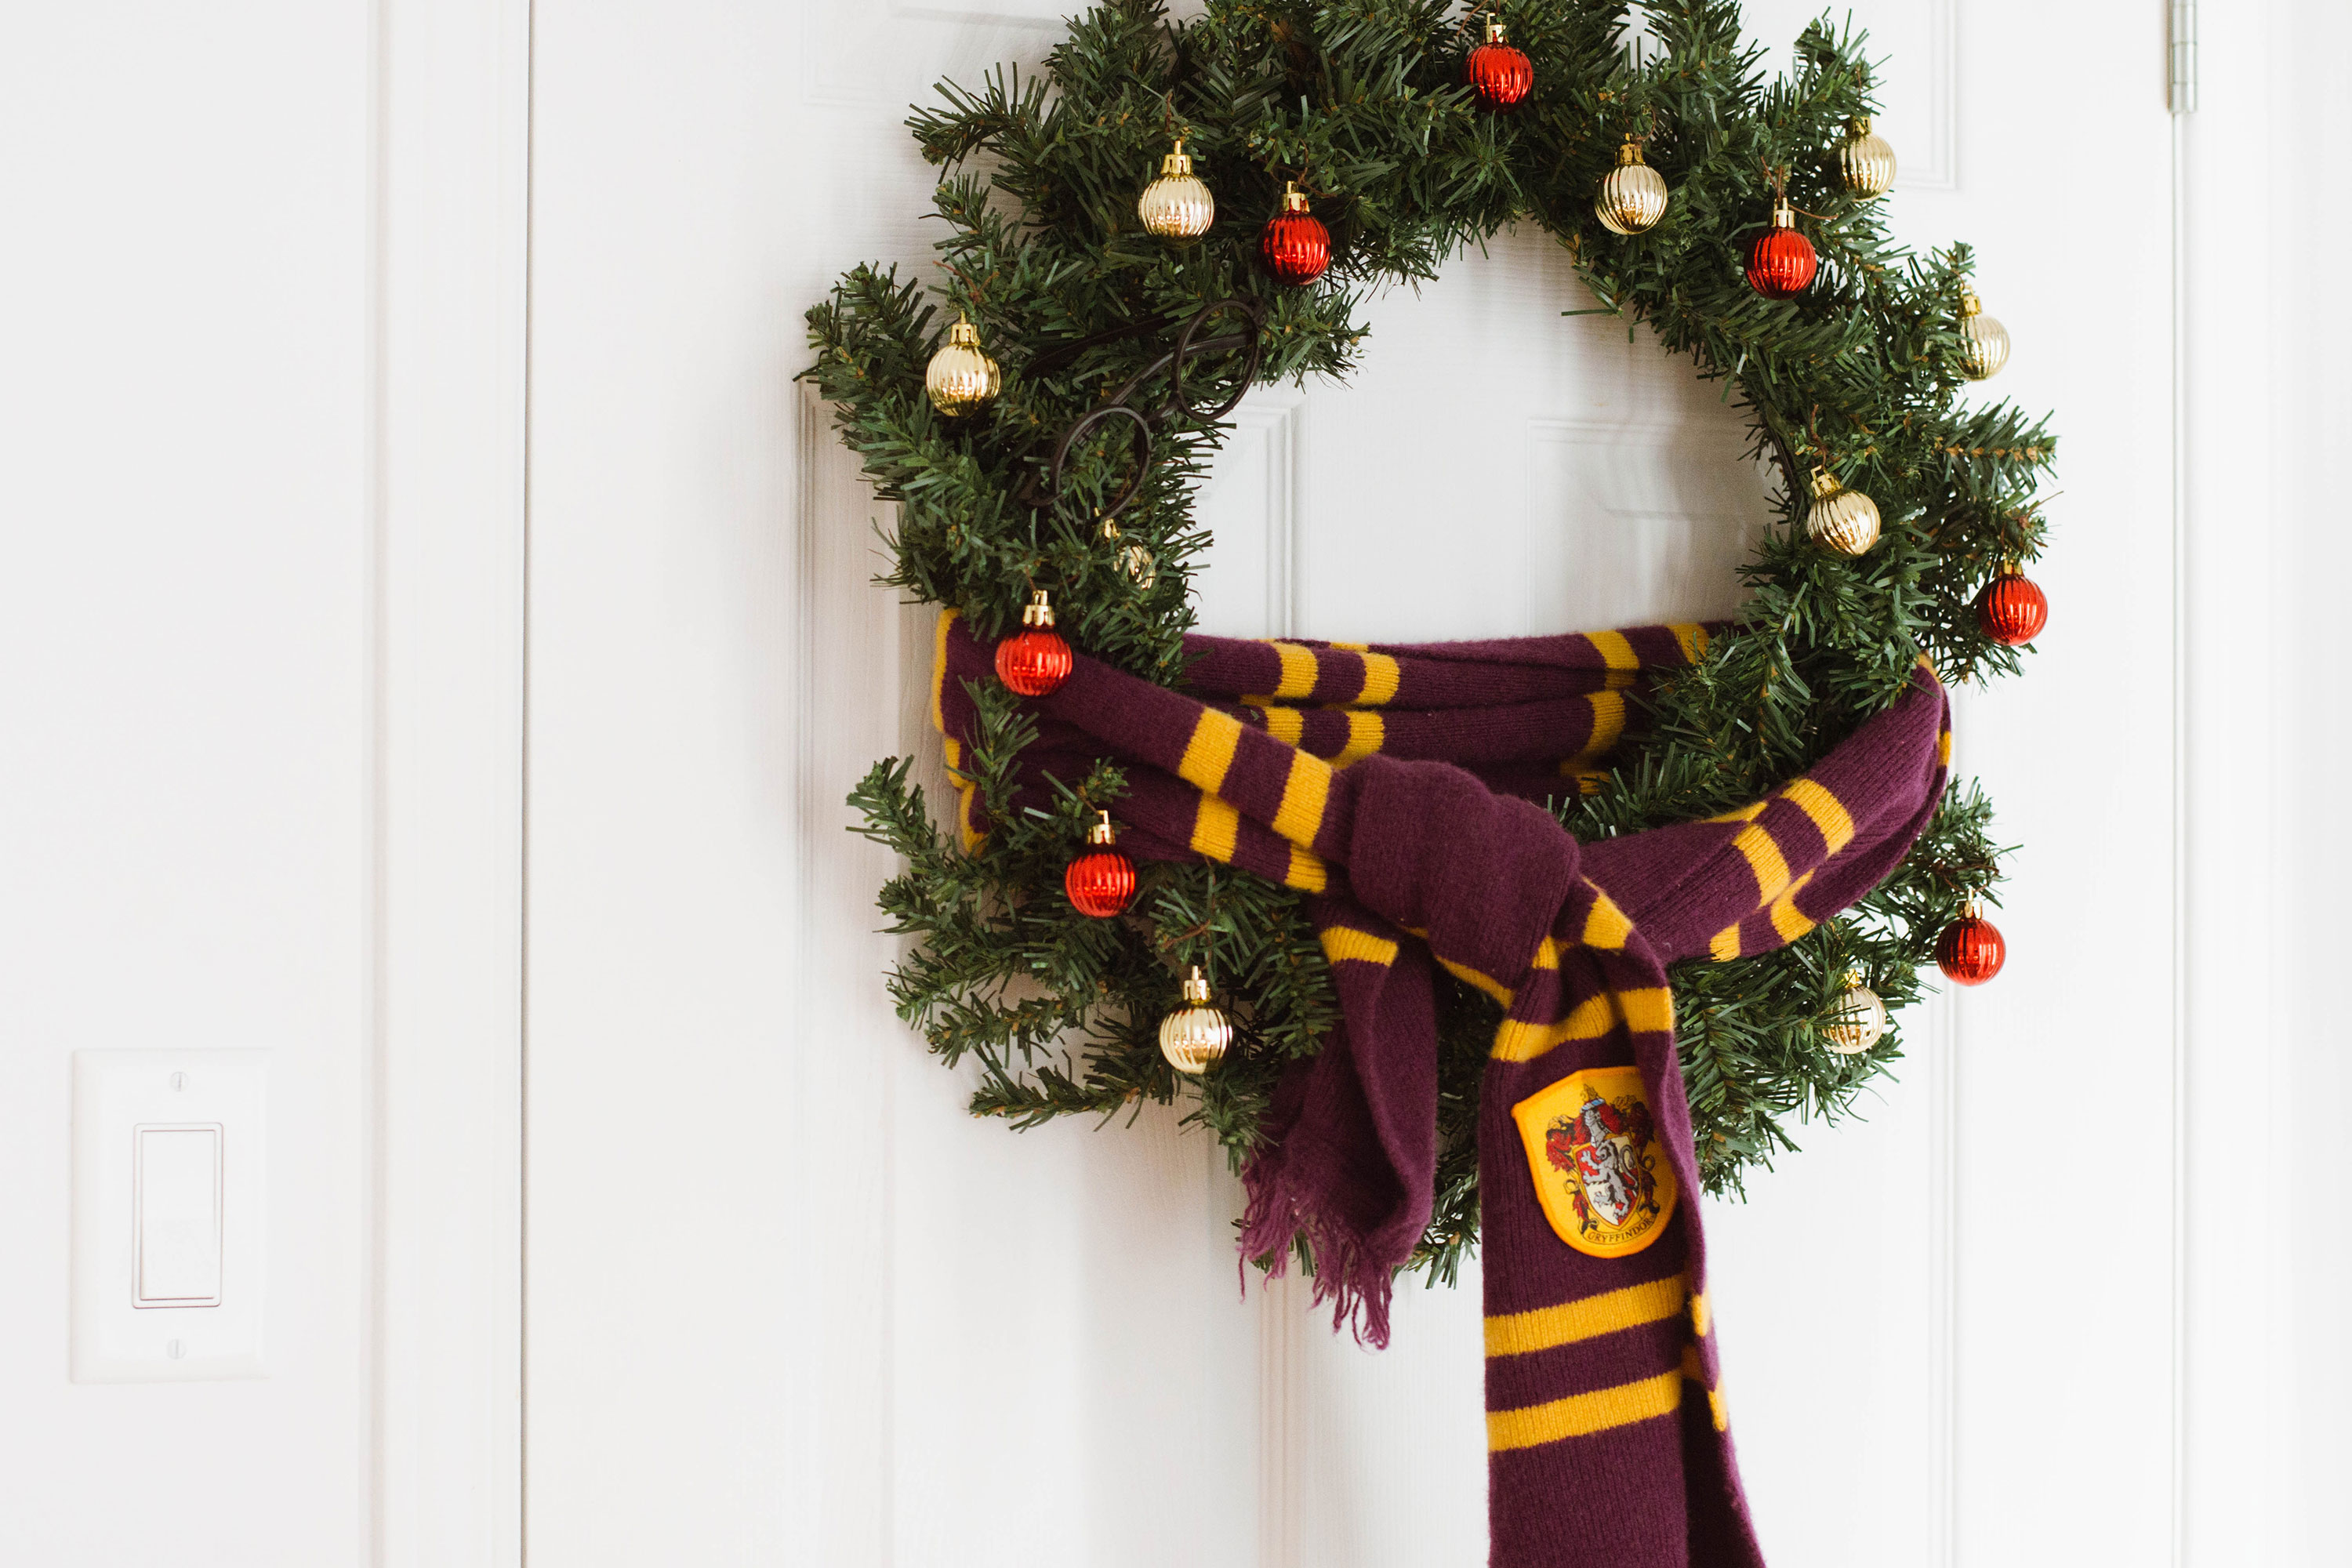 Holiday decor totally inspired by Harry Potter!